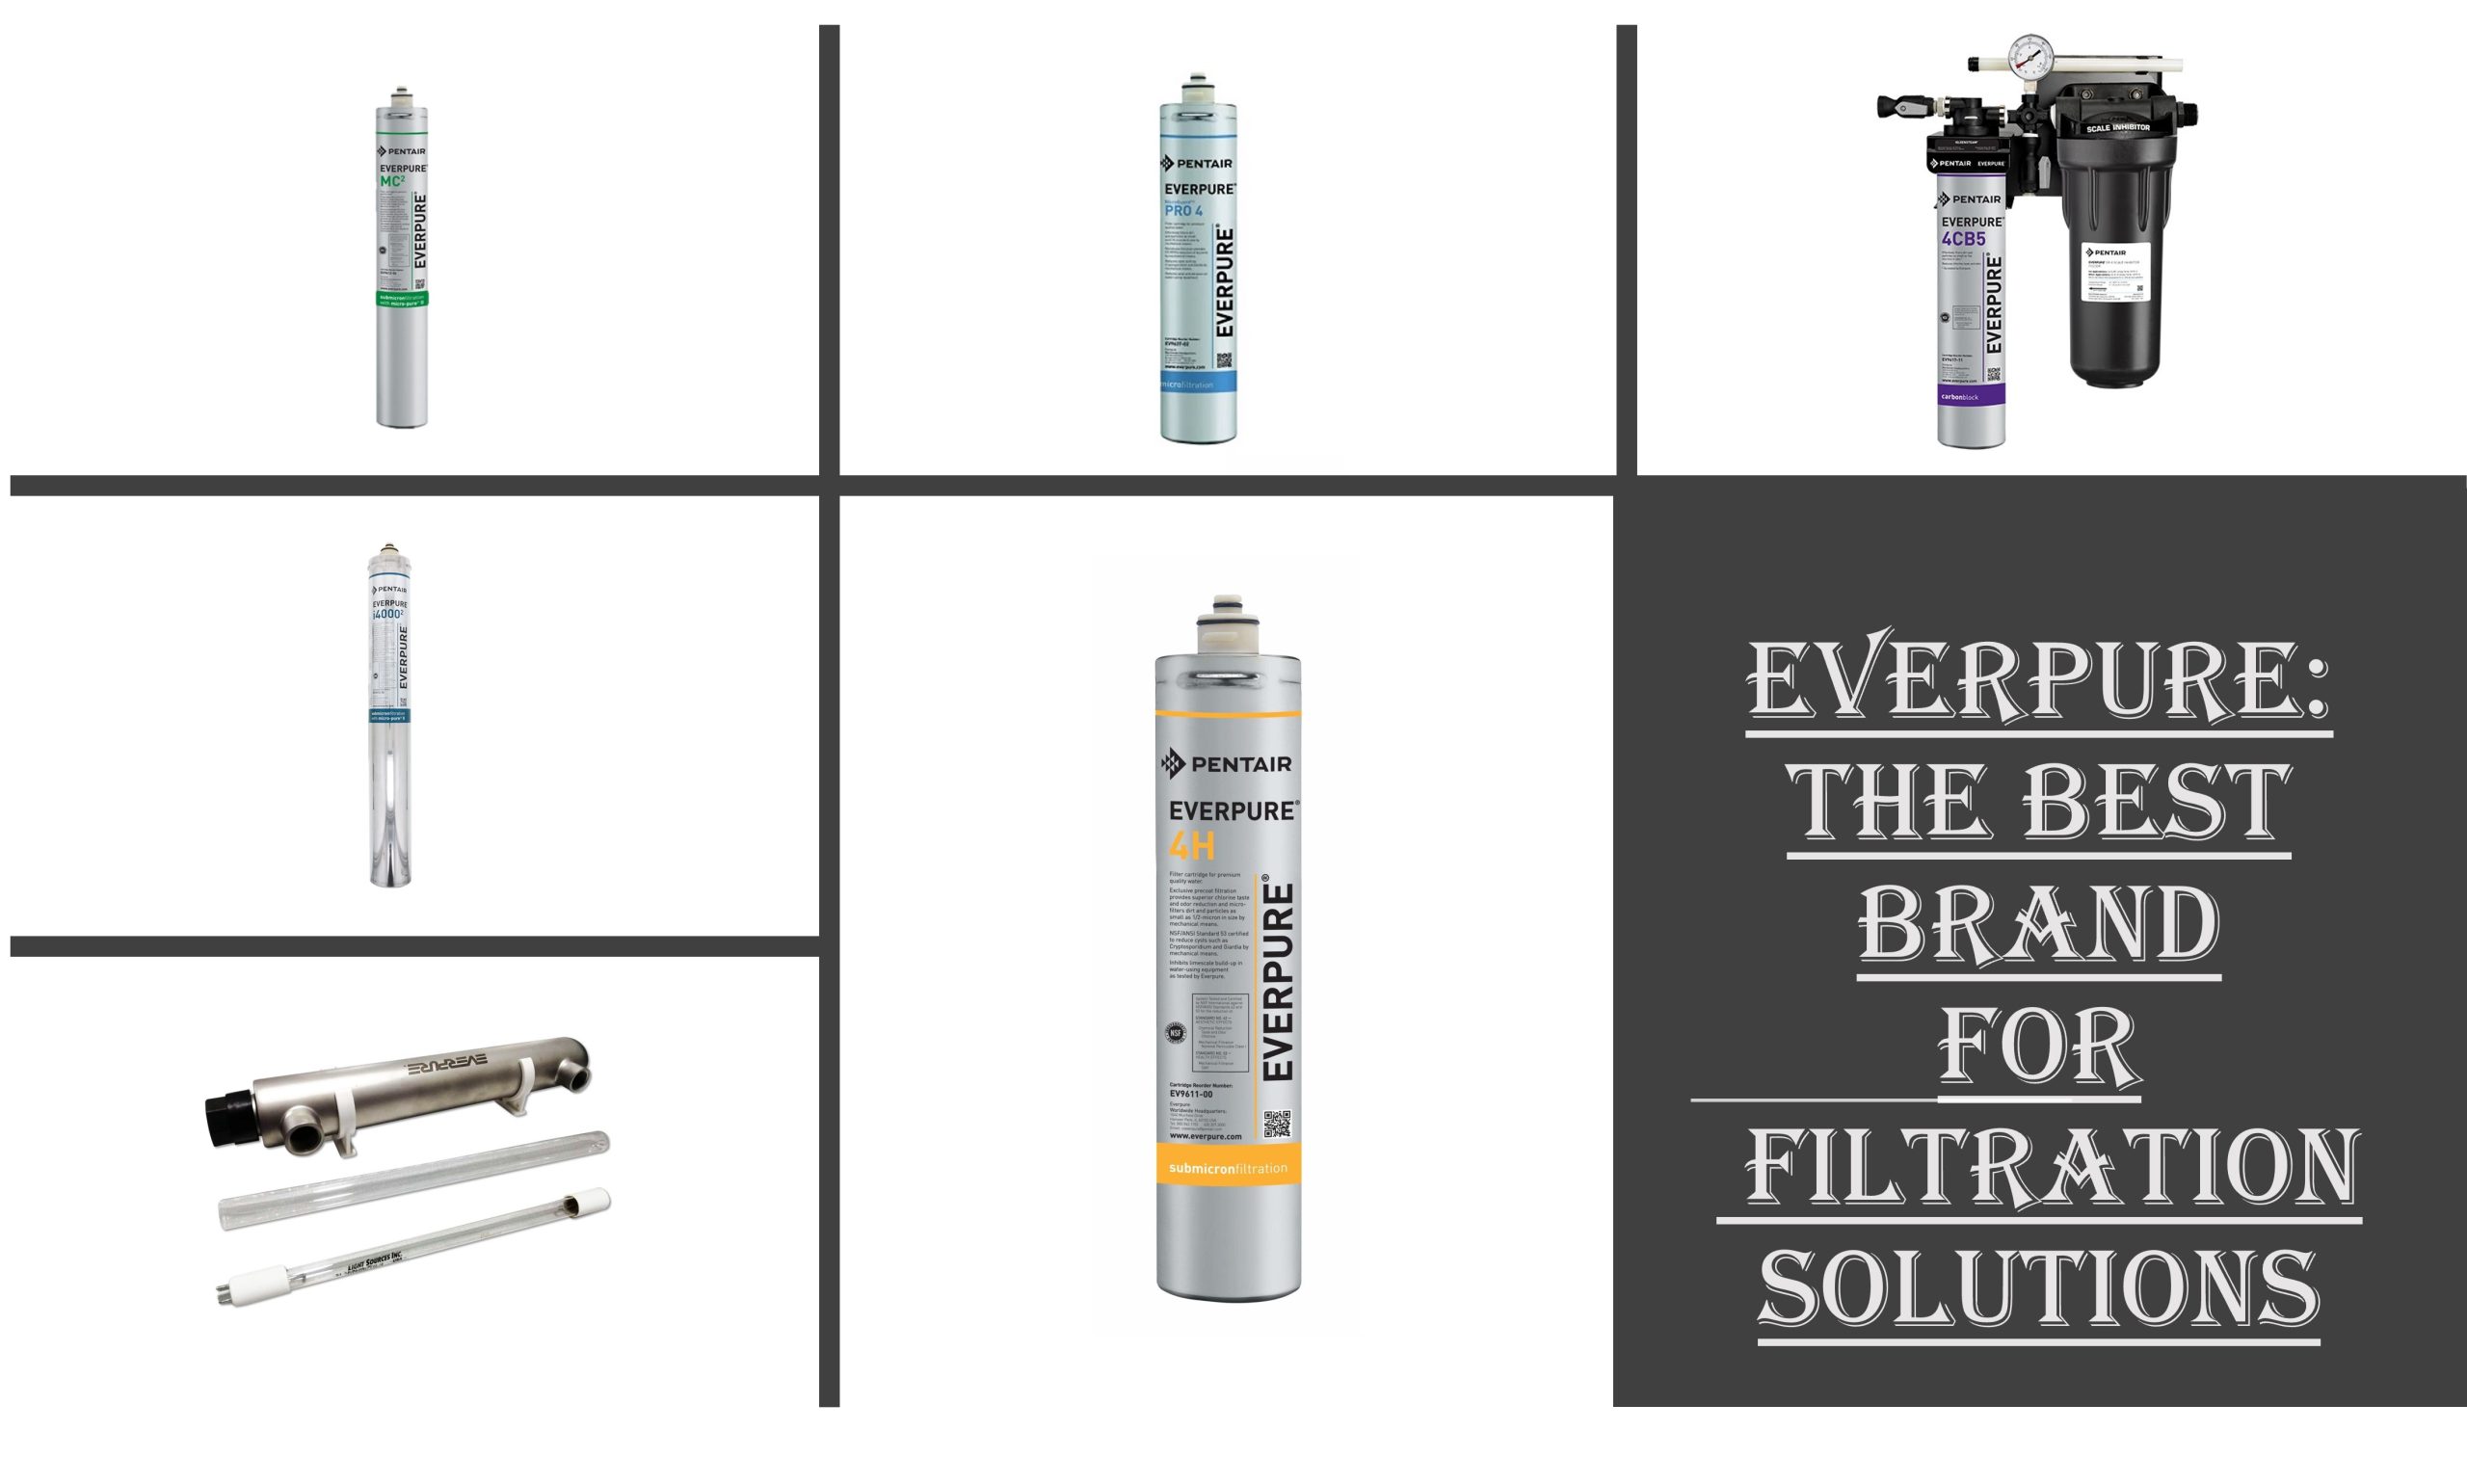 Everpure: The Best Filtration Solutions